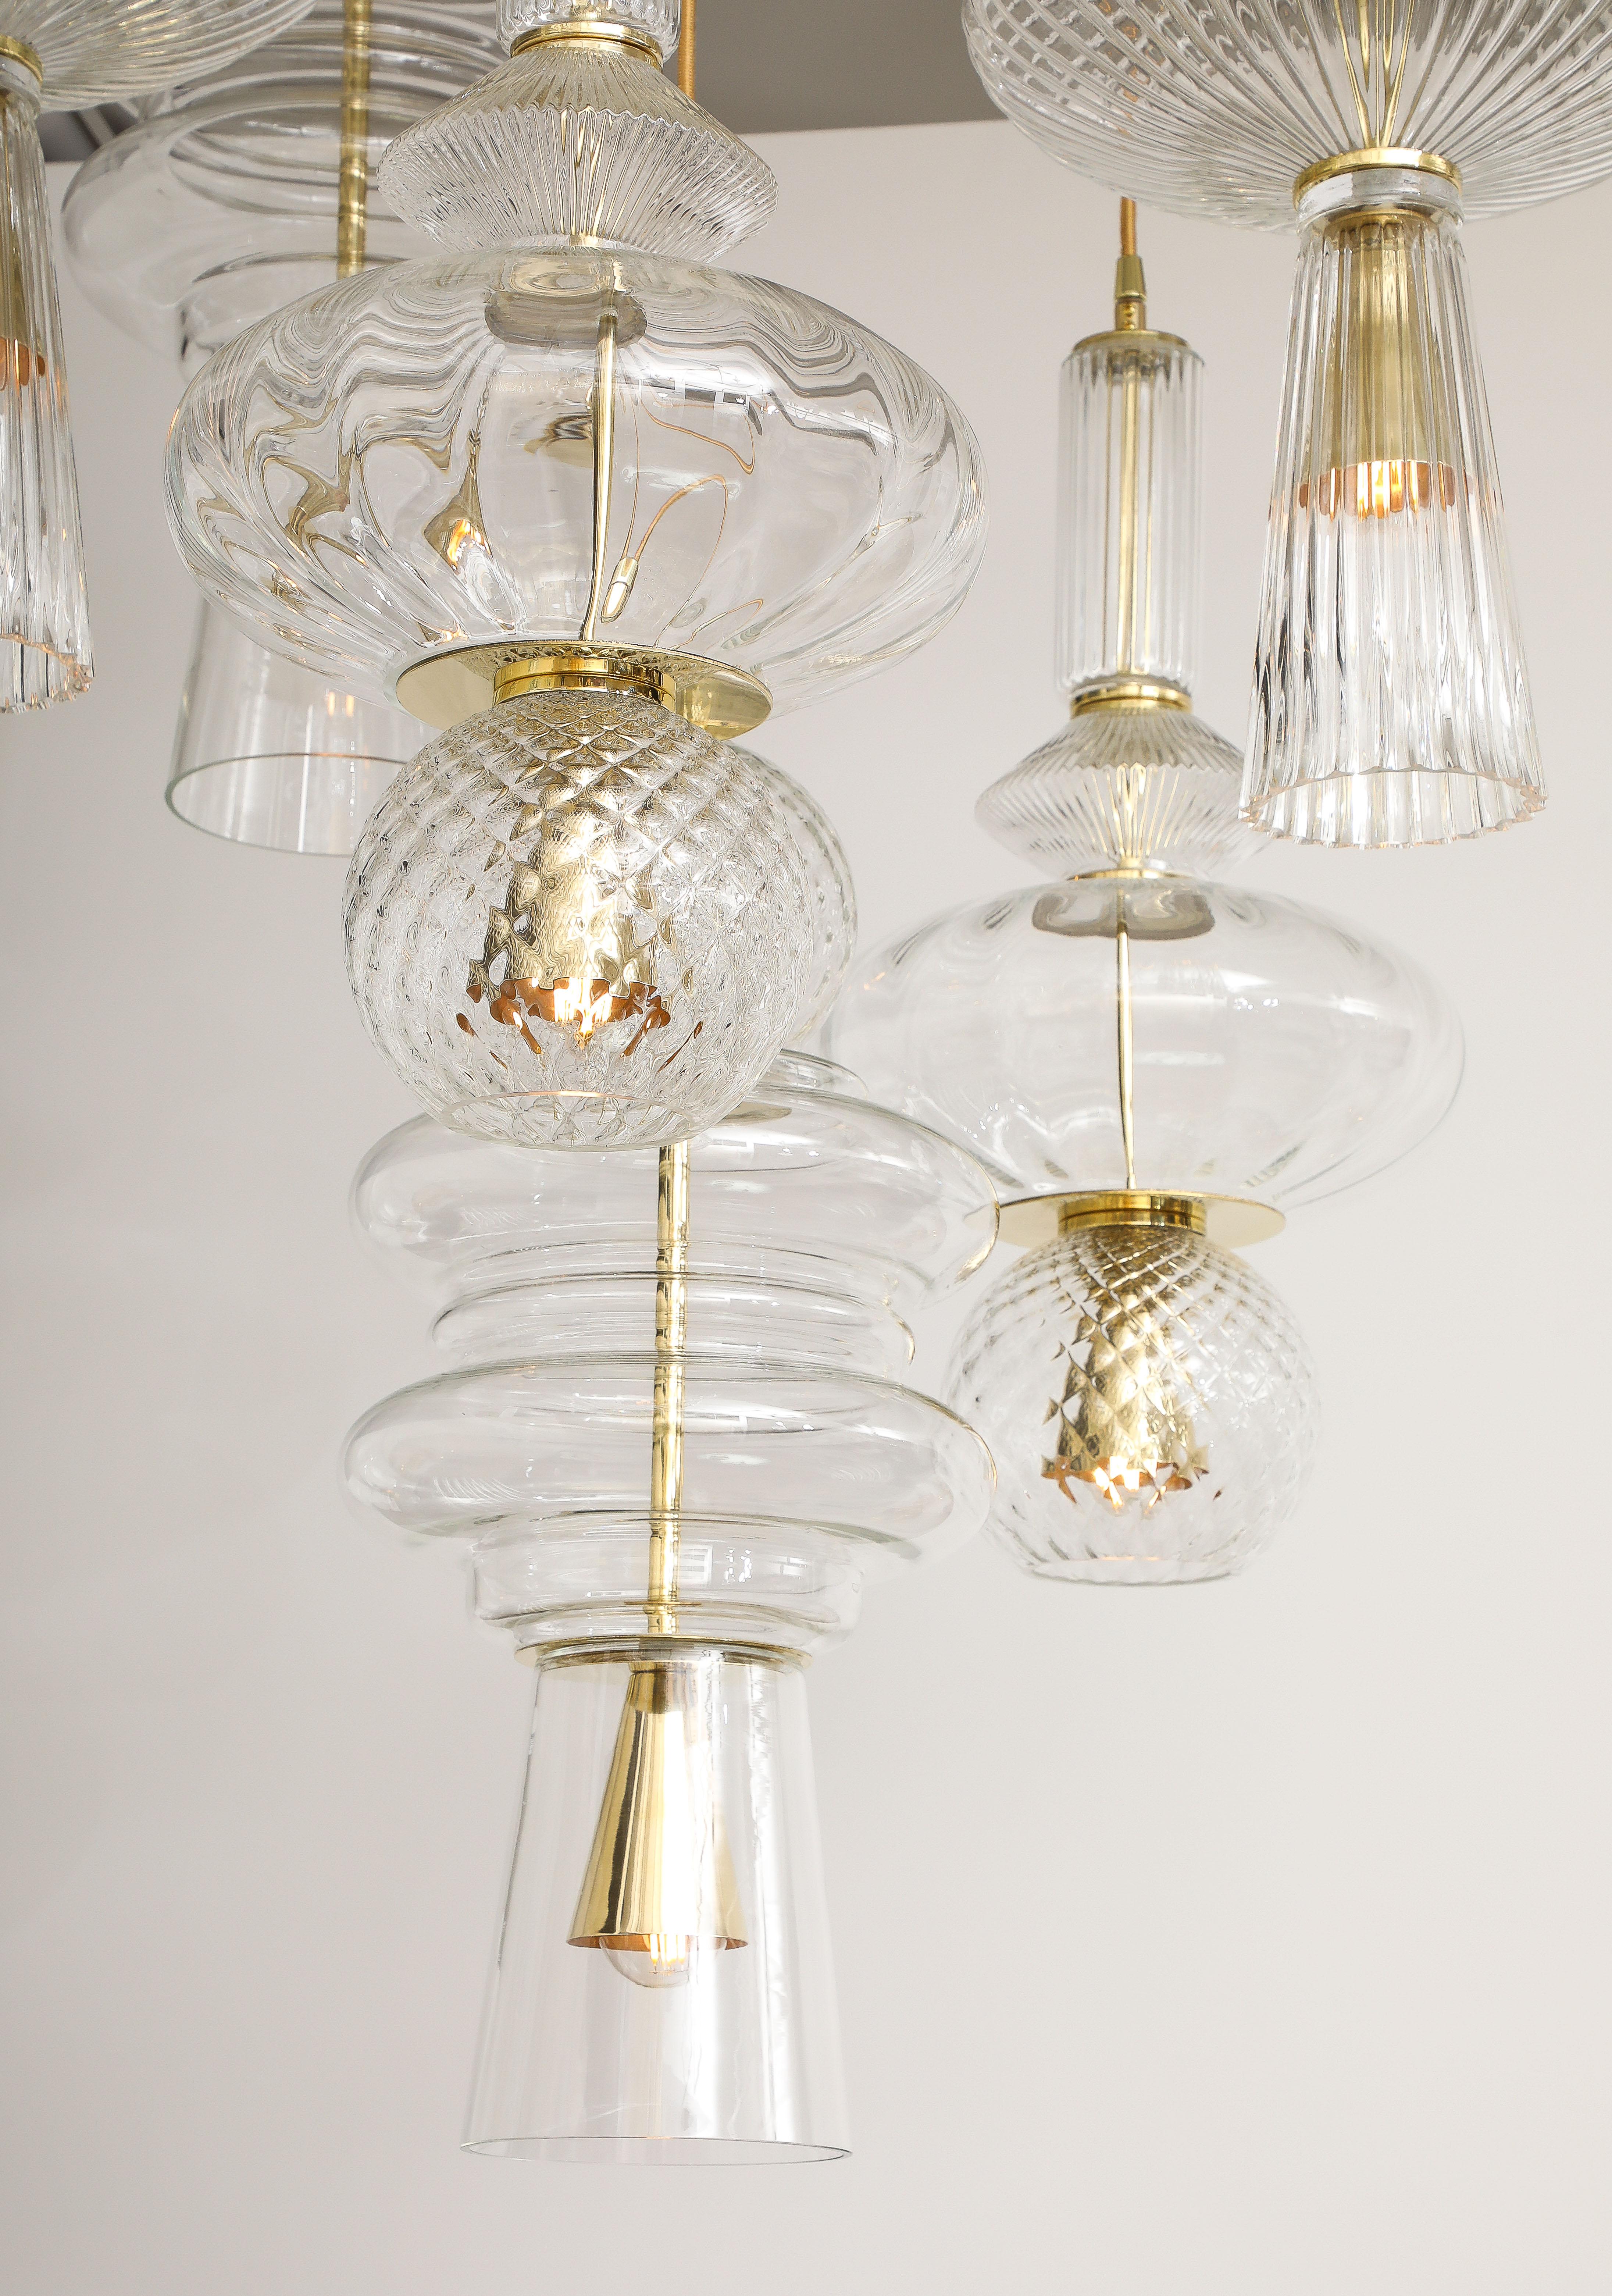 Bespoke Clear Murano Glass Pendants with Brass Suspension Chandelier, Italy. This bespoke suspension chandelier was designed by and custom made to order for Karina Gentinetta by a master glass artisan in Venice, Italy.  Six (6) hand-blown clear